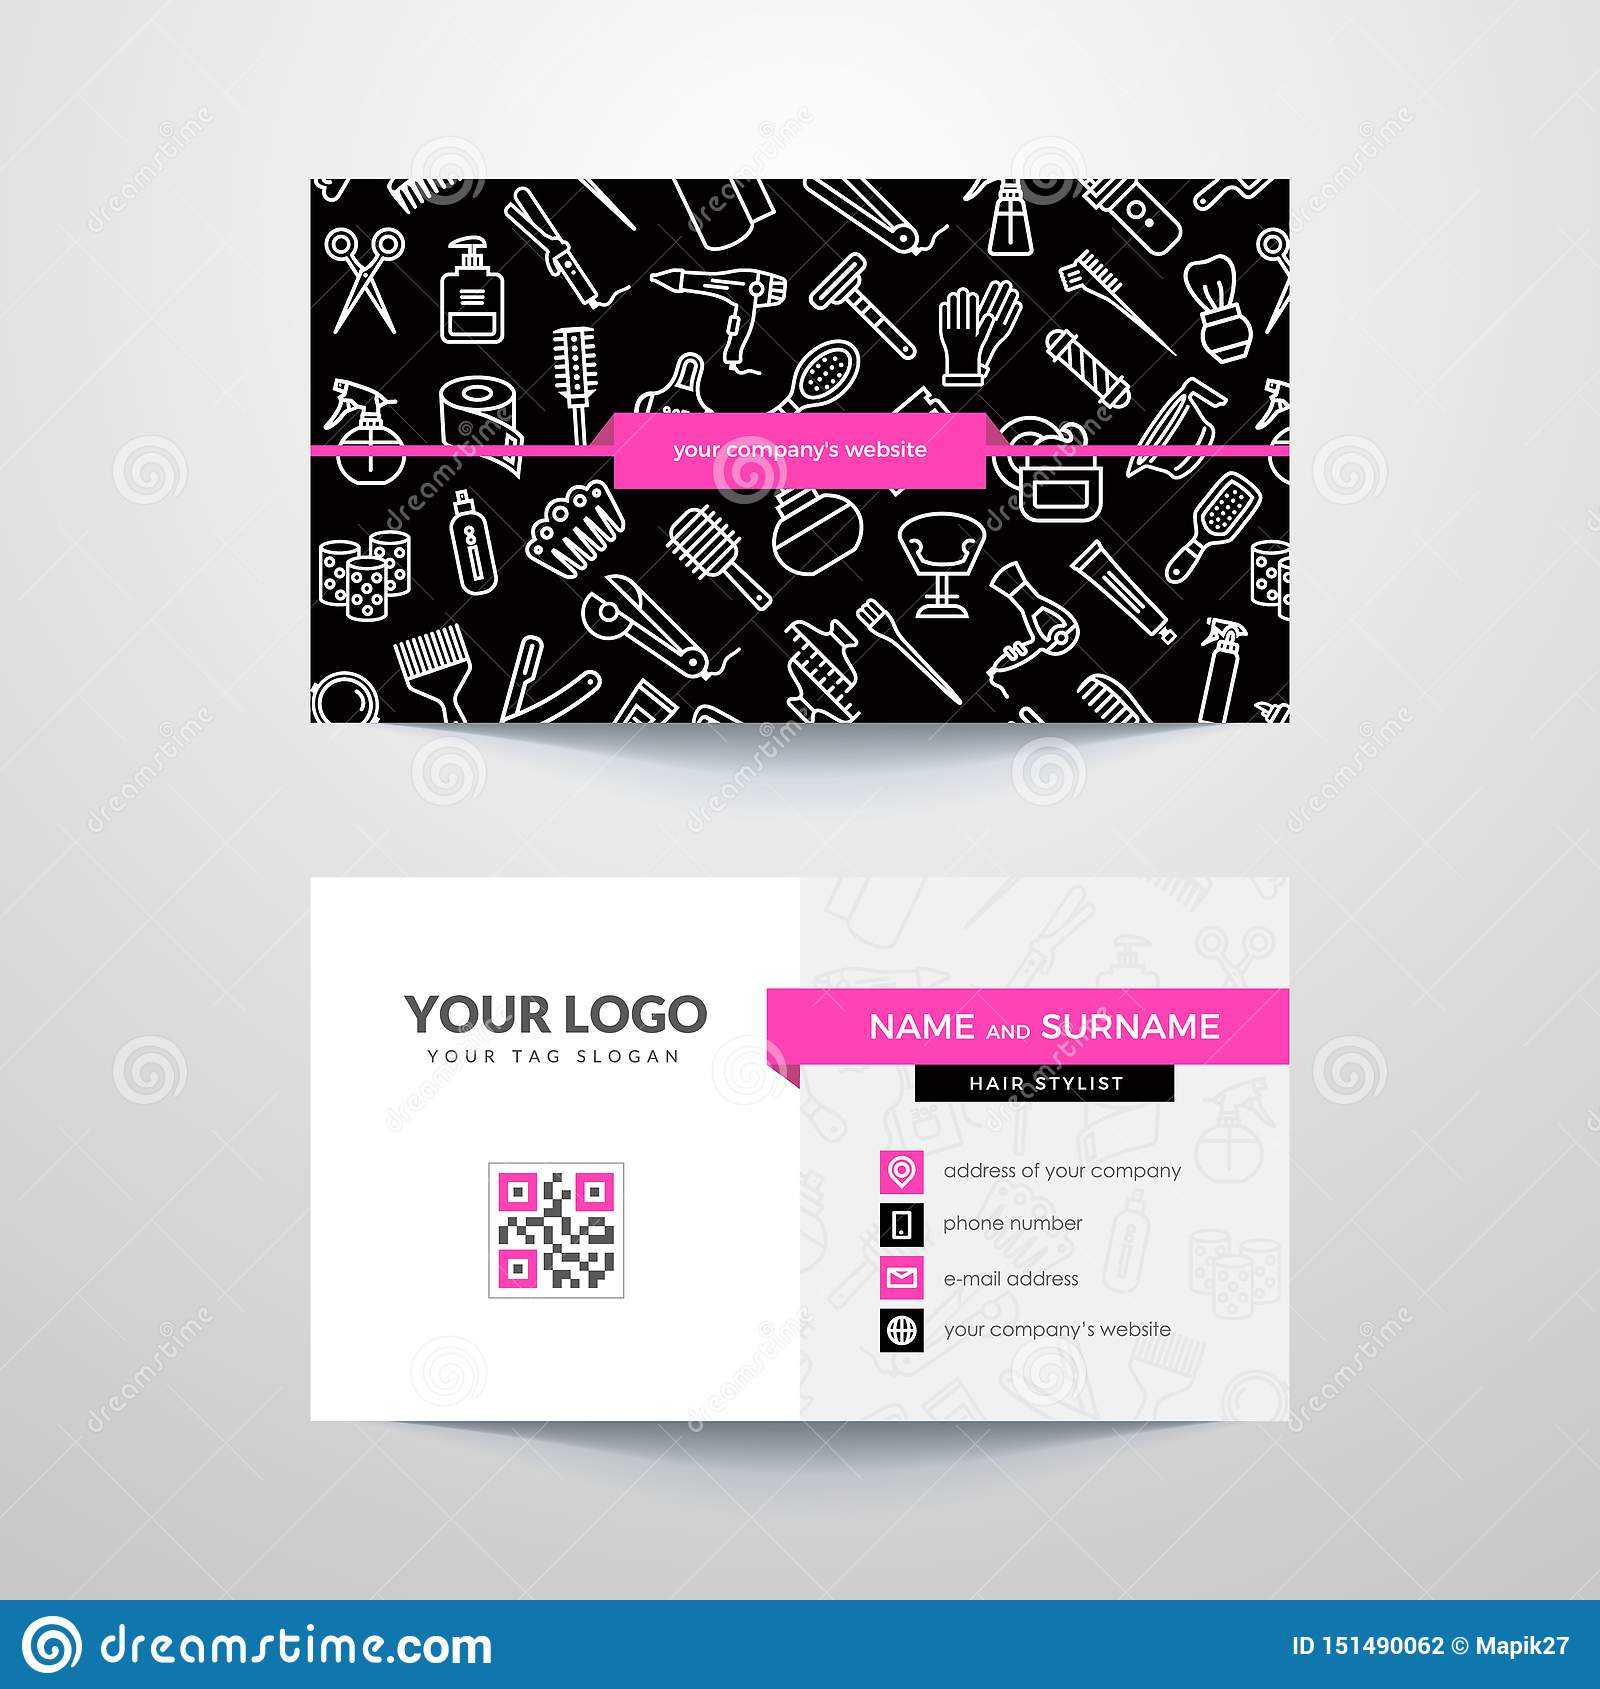 Business Card Template With Hair Salon Symbols. Stock Vector In Hair Salon Business Card Template